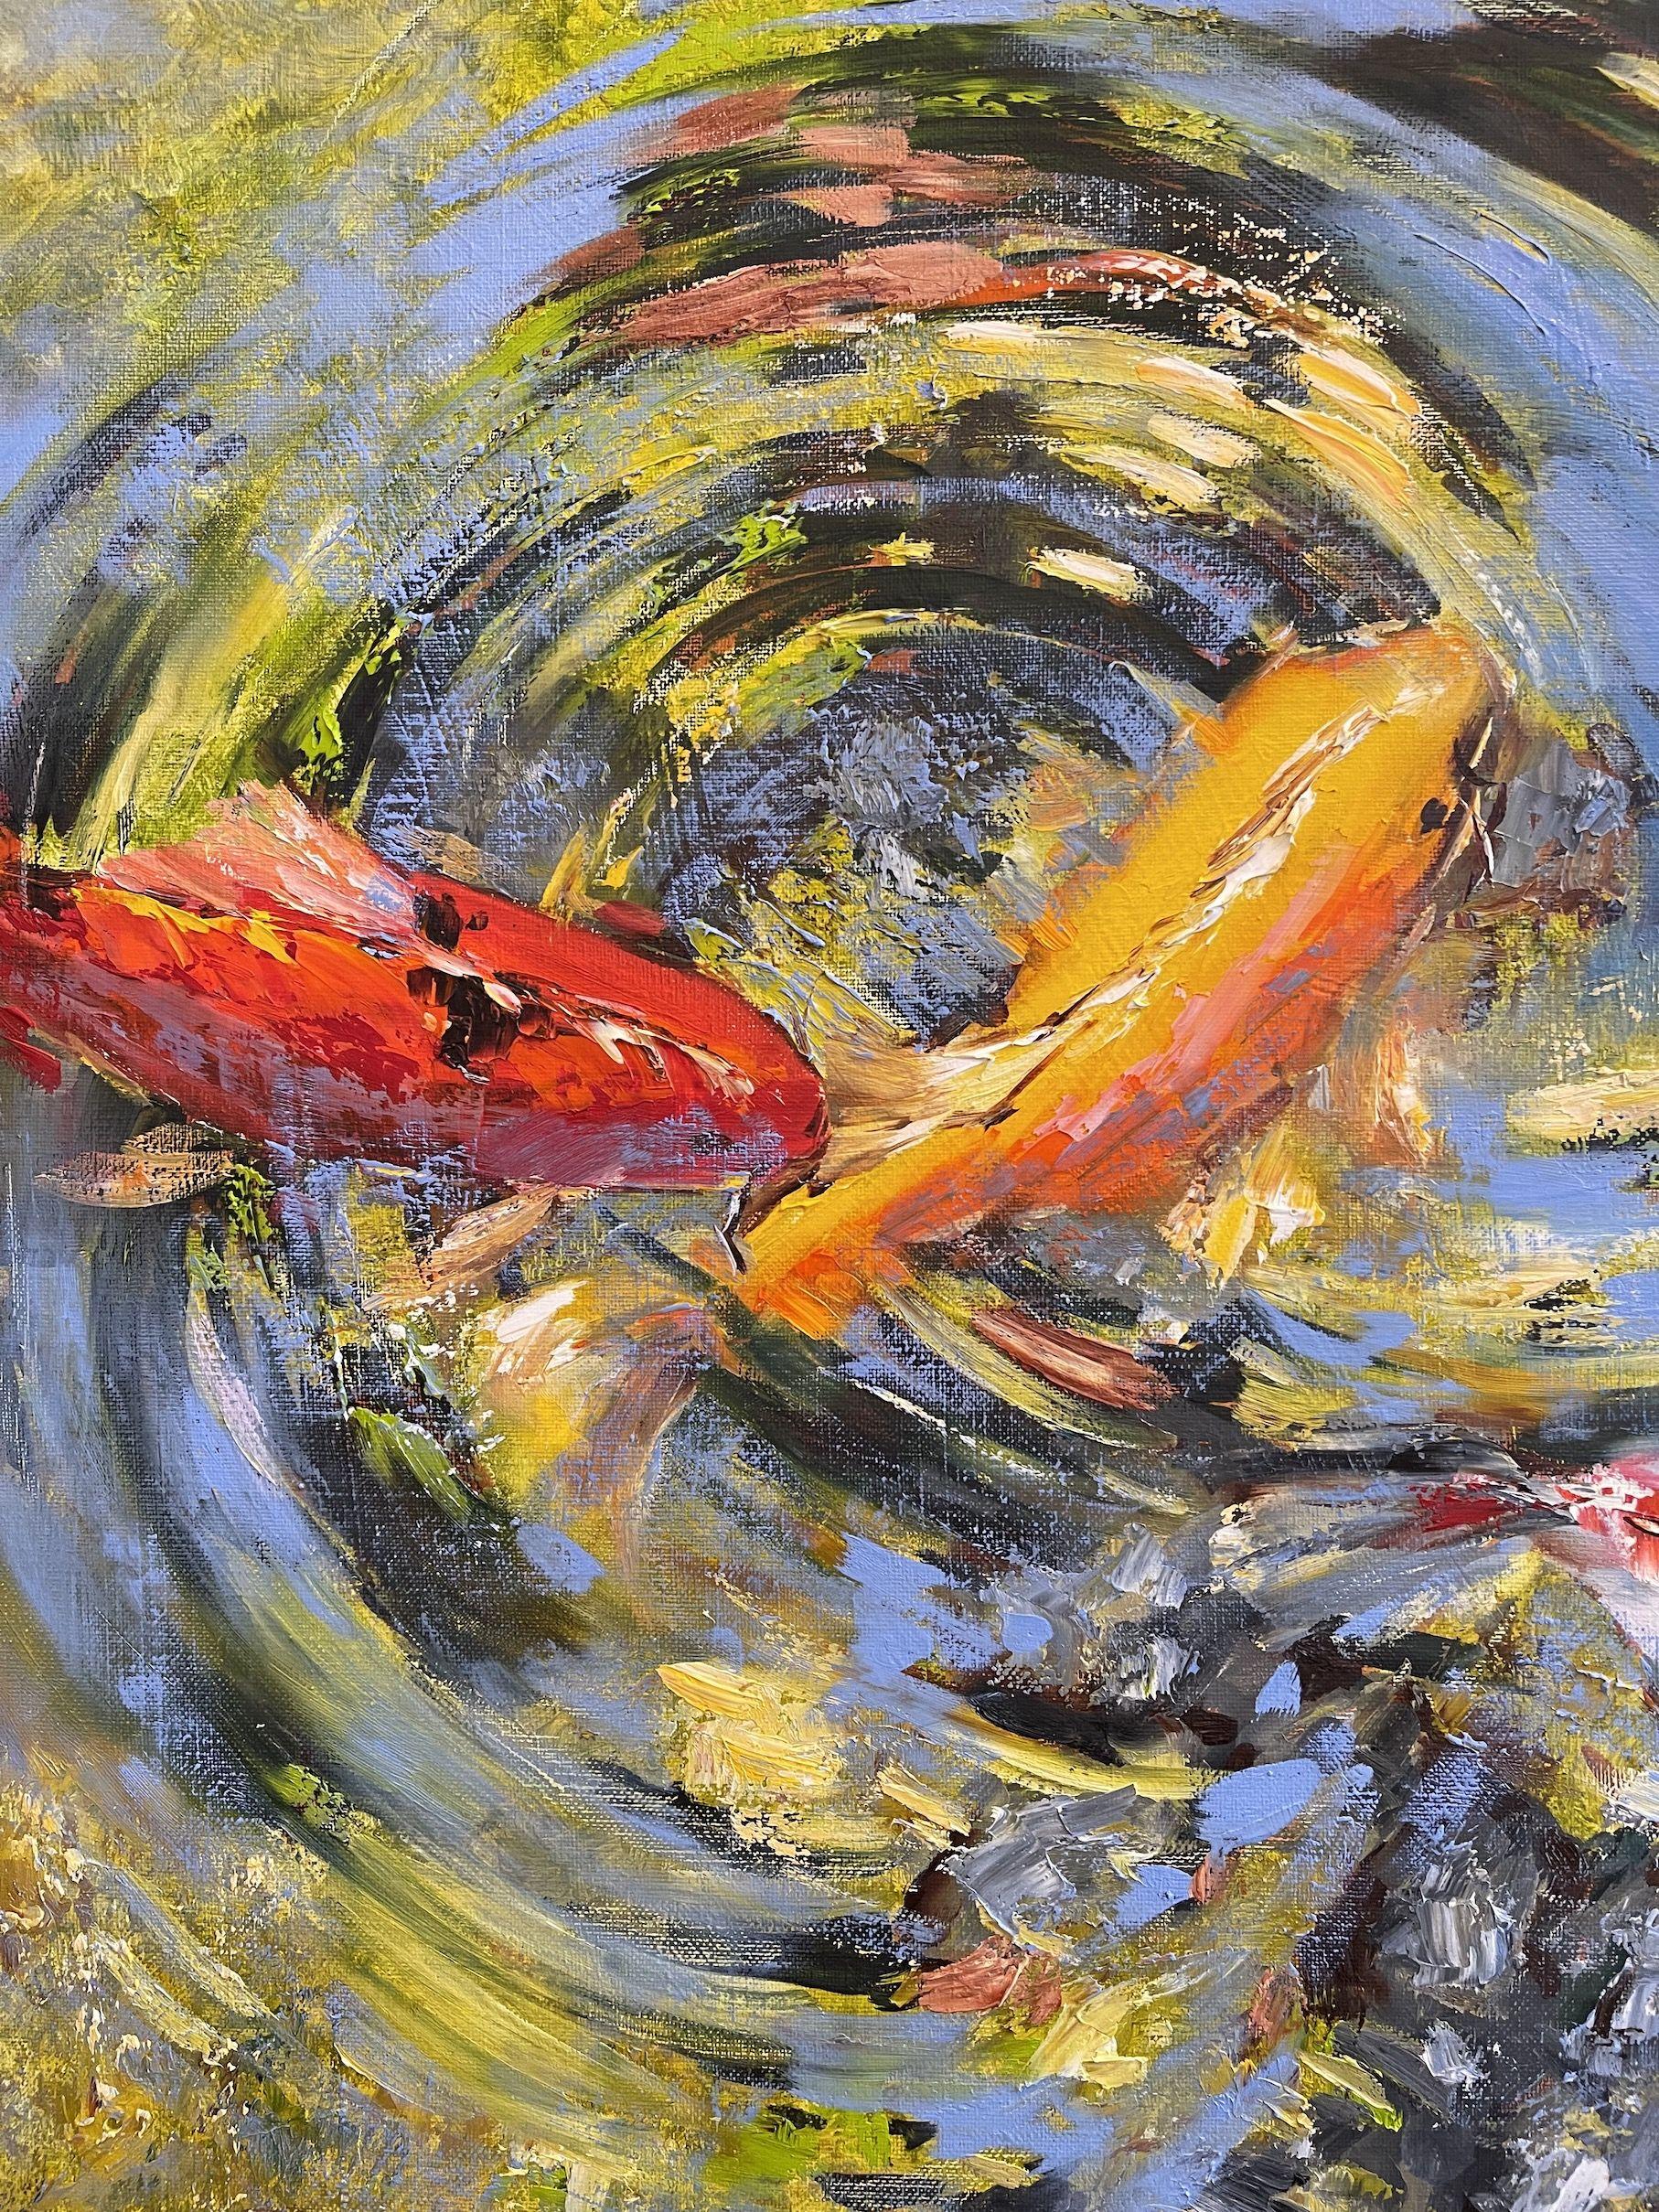 Collection Â«Ponds & Koi FishÂ» * * * Â«The captivating combination of artistic techniques adopted by Malivani provokes deep intrigue and curiosity in the spectator, who is charmed by the sophisticated and inviting aura as each painting evokes the